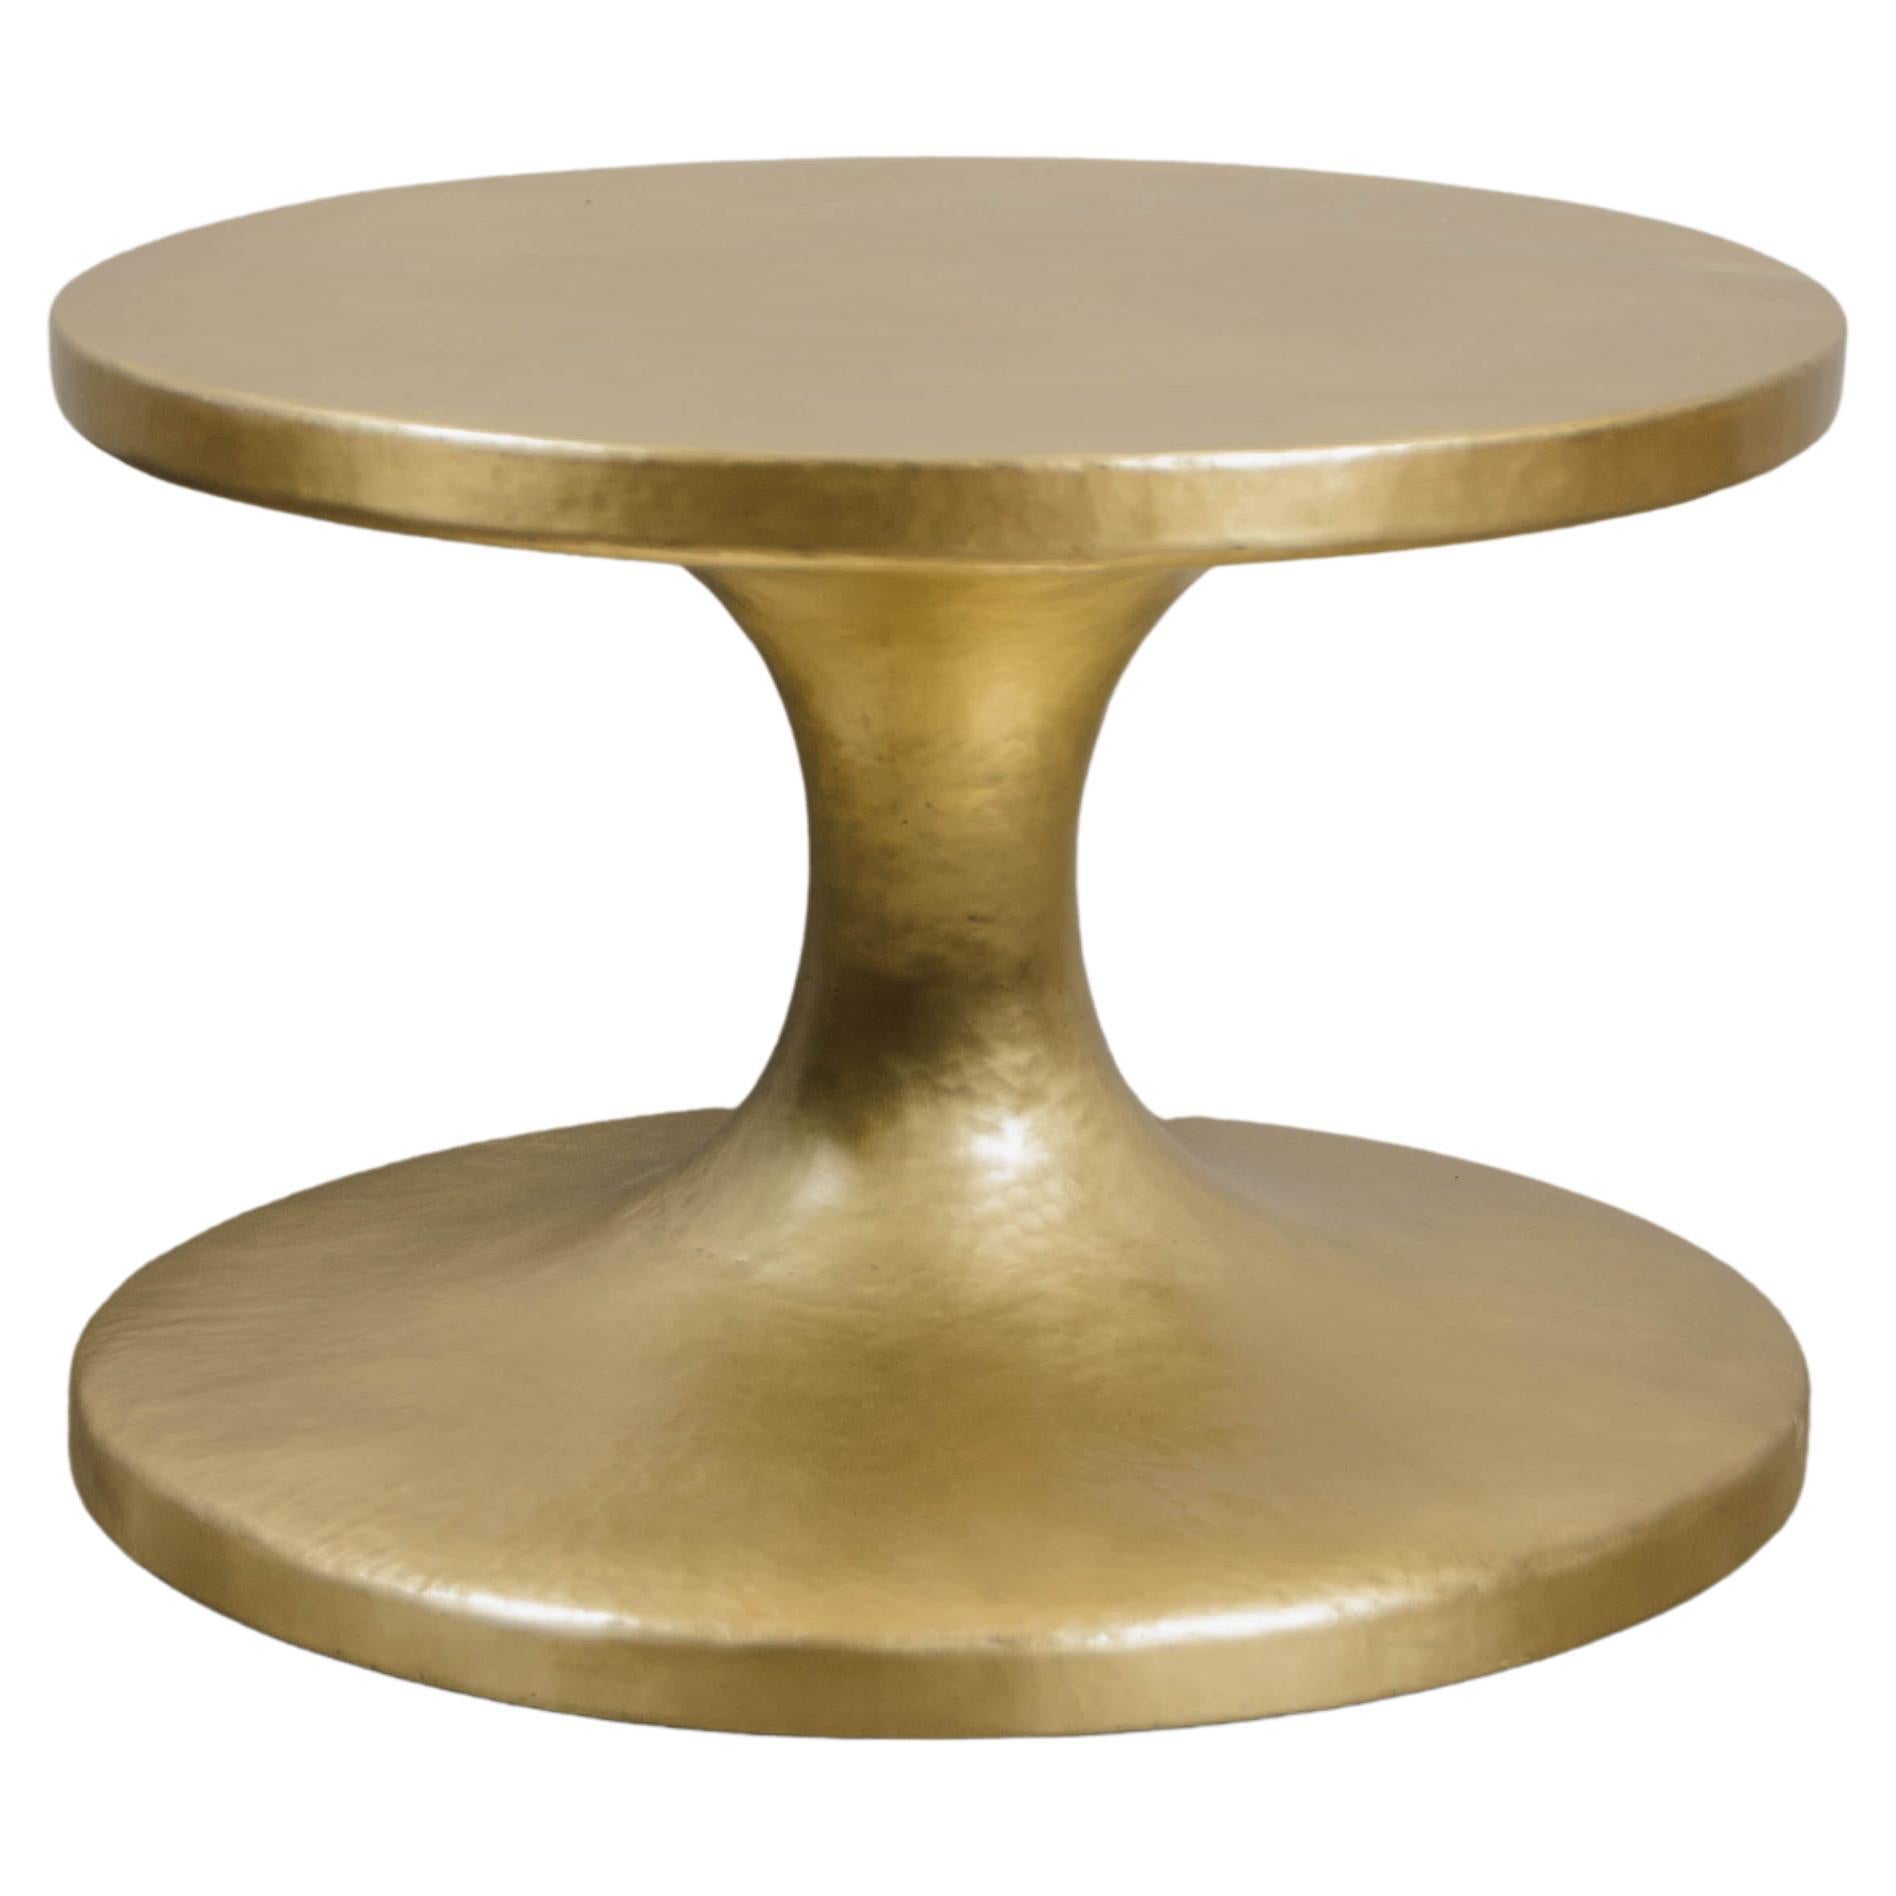 Contemporary Spool Side Table in Brass by Robert Kuo, Hand Repoussé